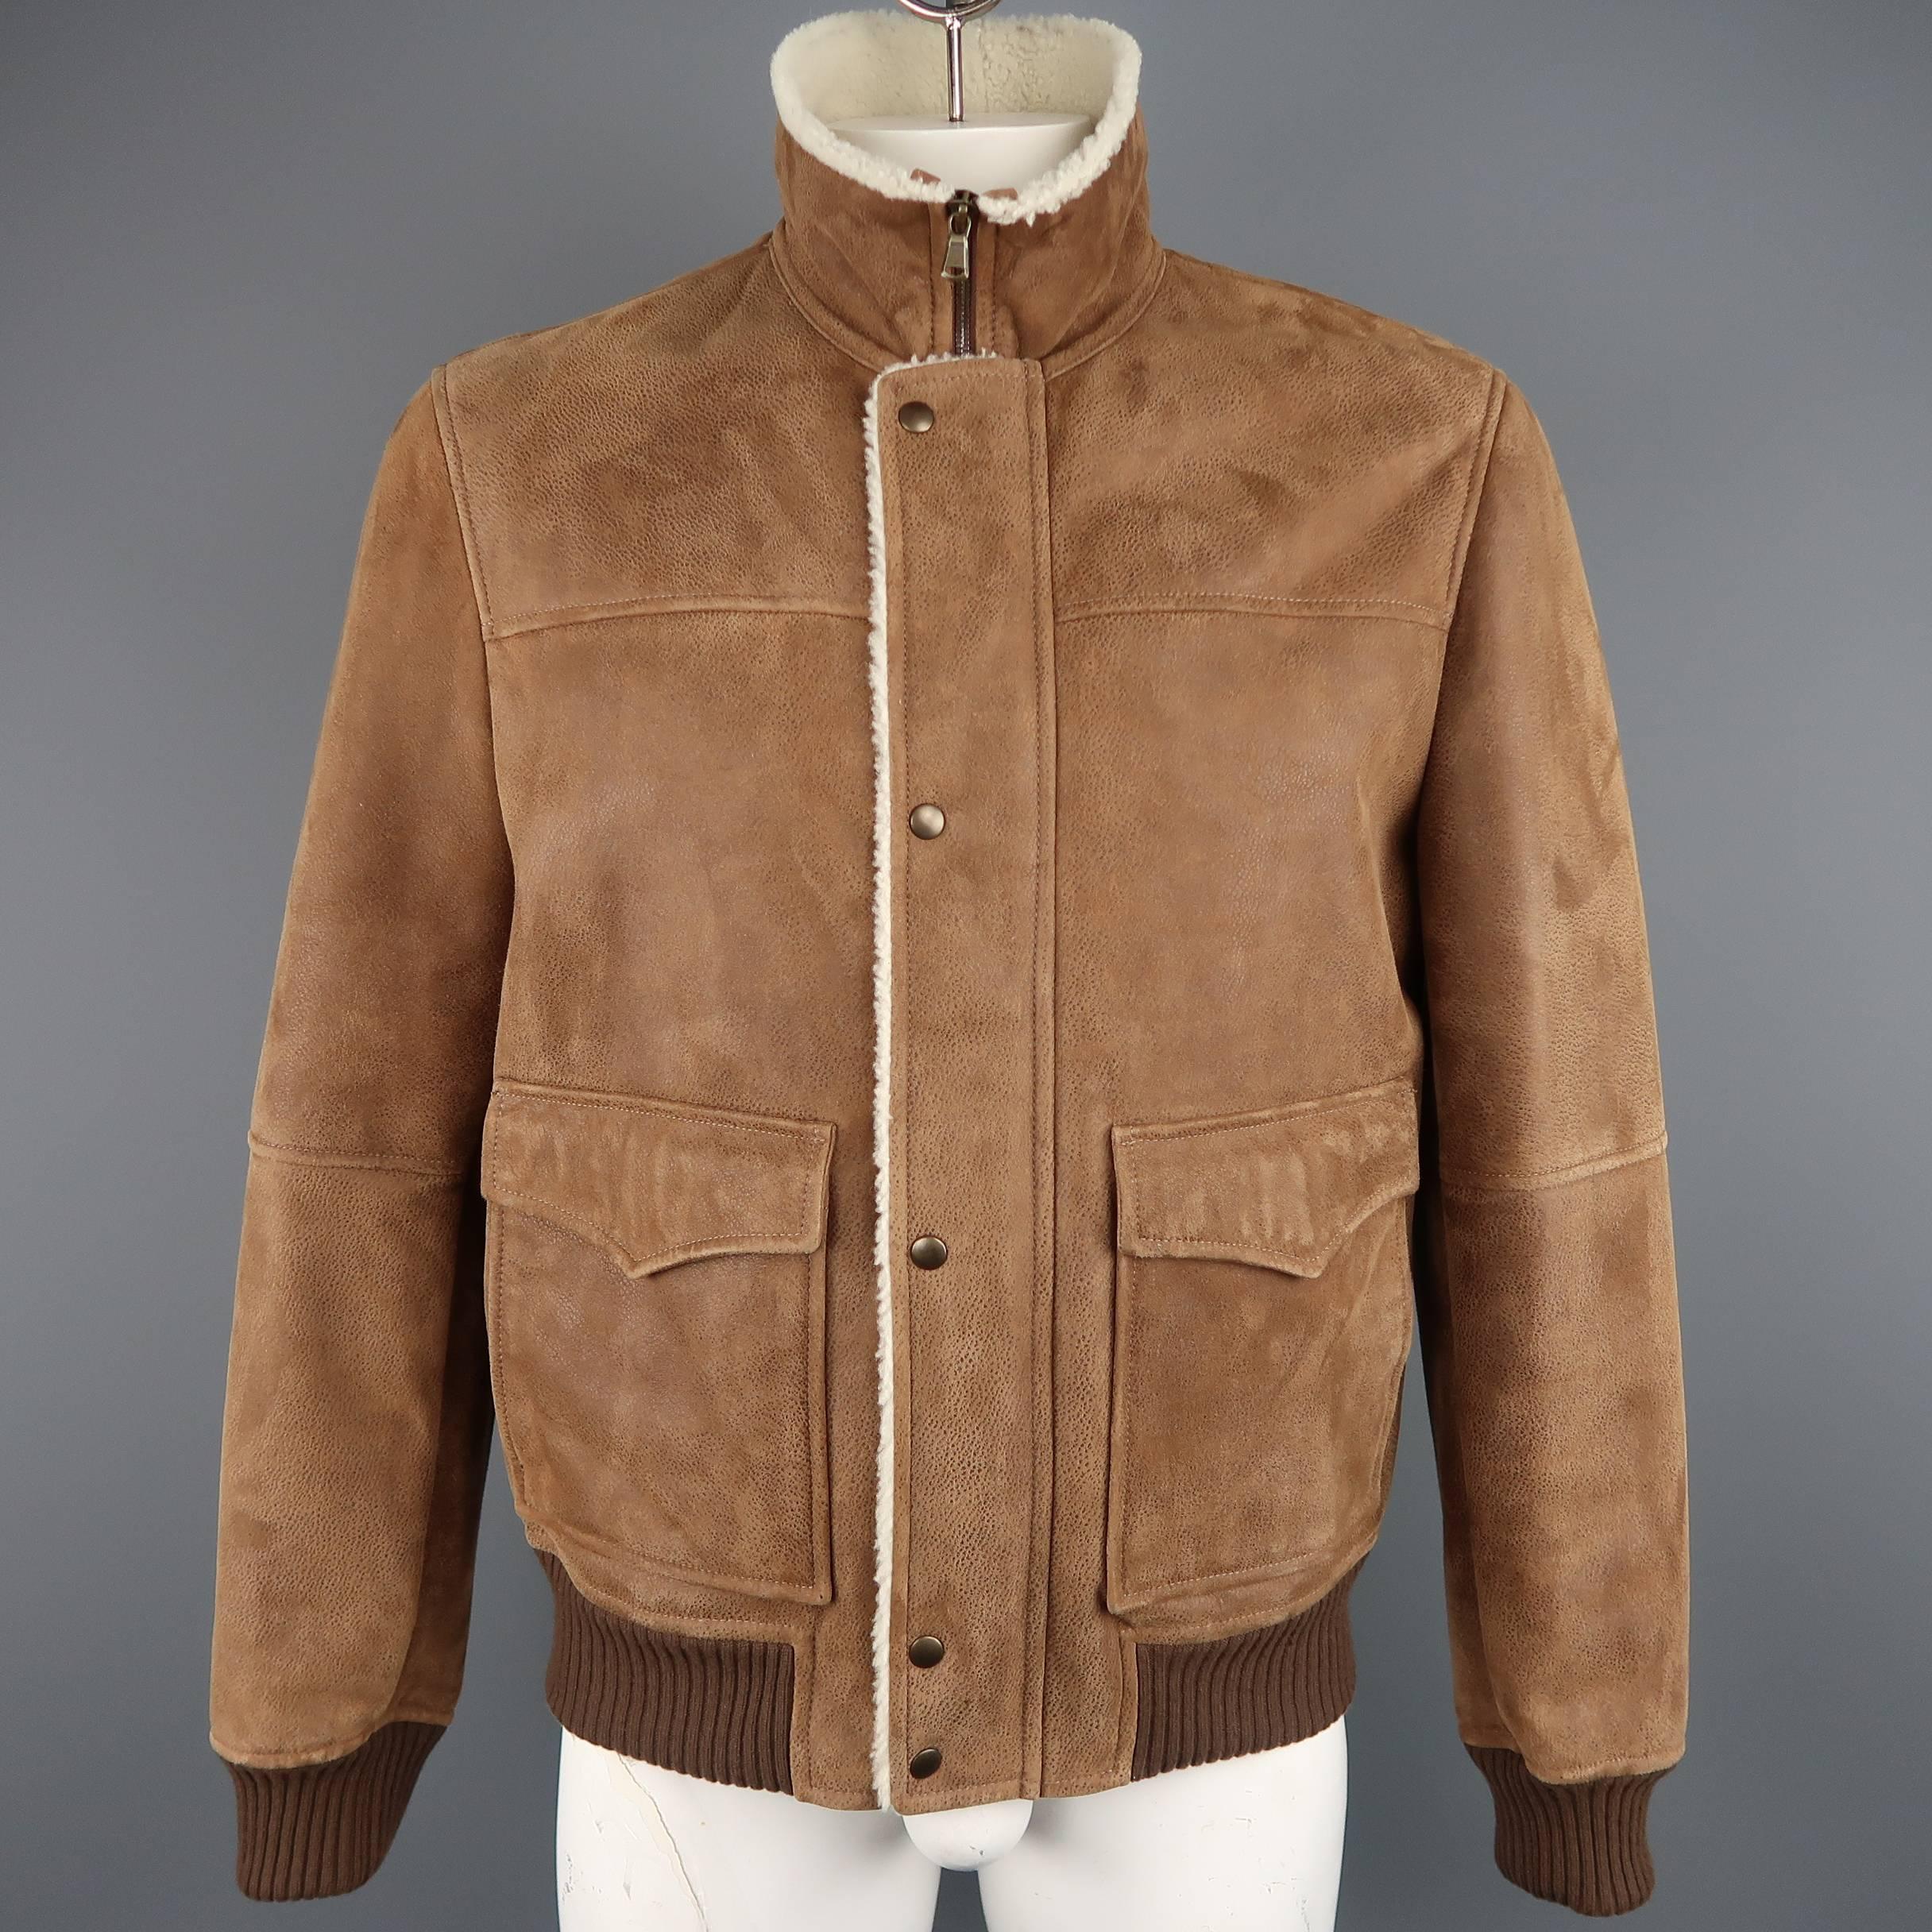 BRUNELLO CUCINELLI bomber jacket comes in tan spotted, cream fur interior  shearling with a high collar, zip closure with hidden snap placket, patch flap pockets, and brown ribbed knit waistband and cuffs. Made in Italy.
 
Excellent Pre-Owned